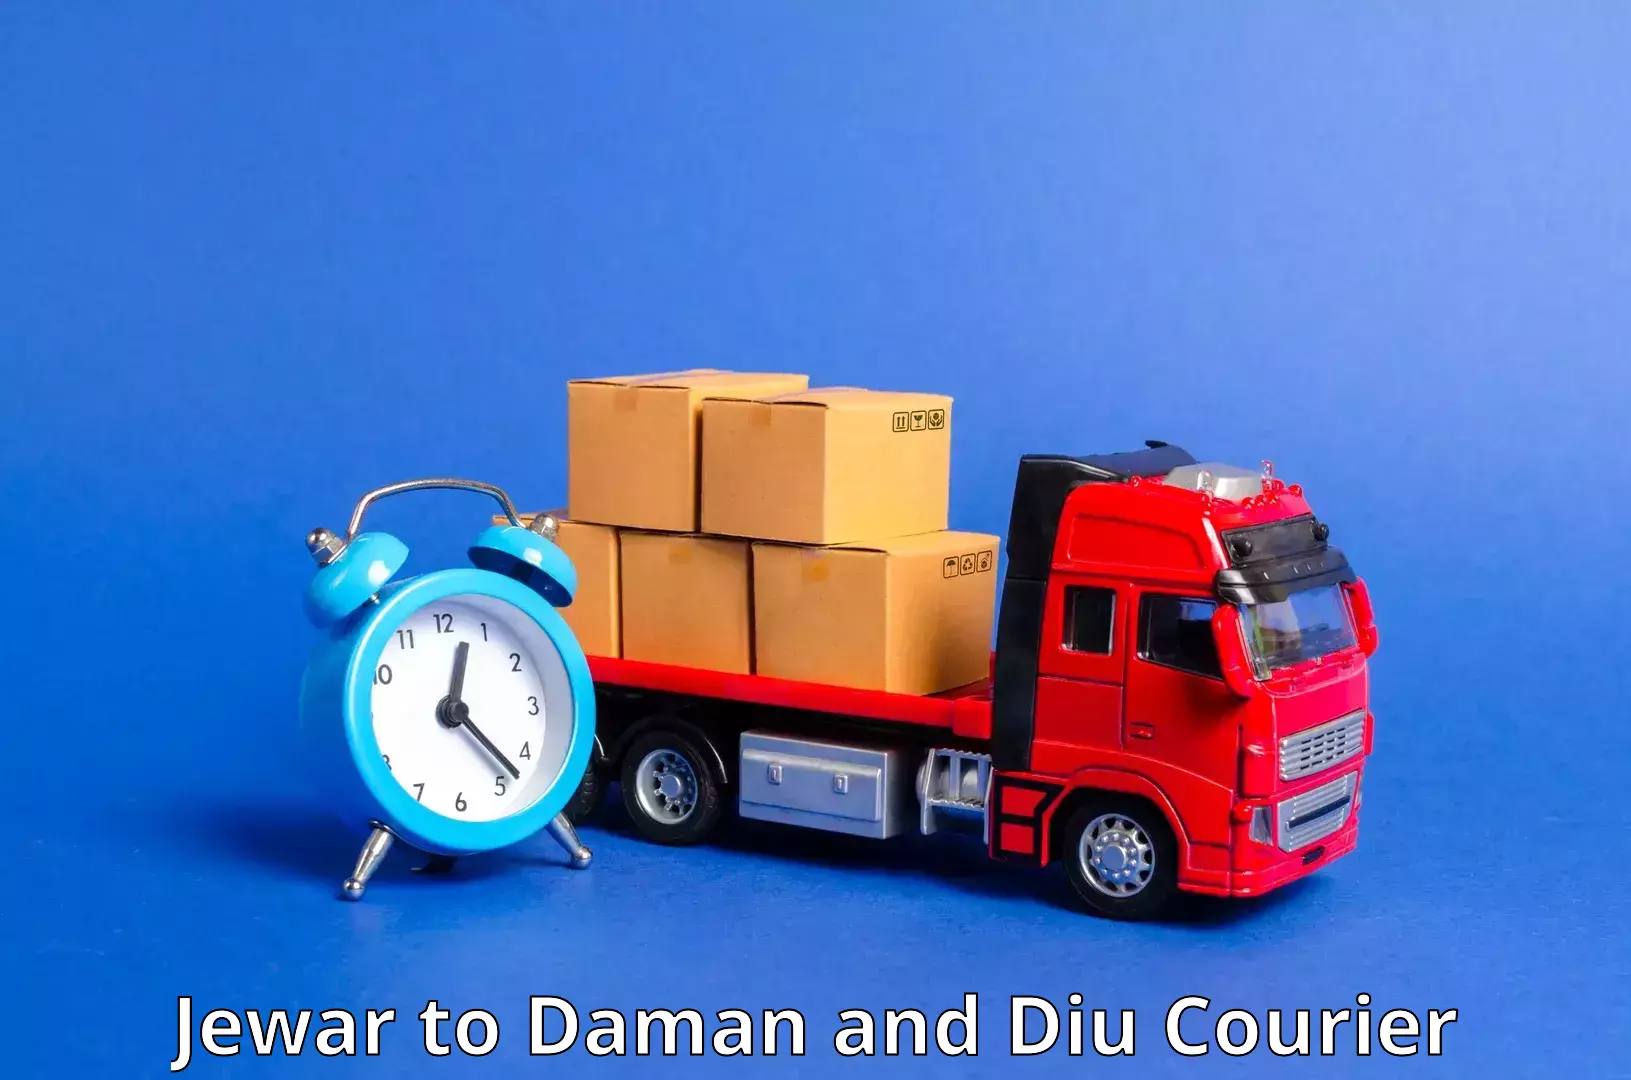 User-friendly delivery service Jewar to Daman and Diu